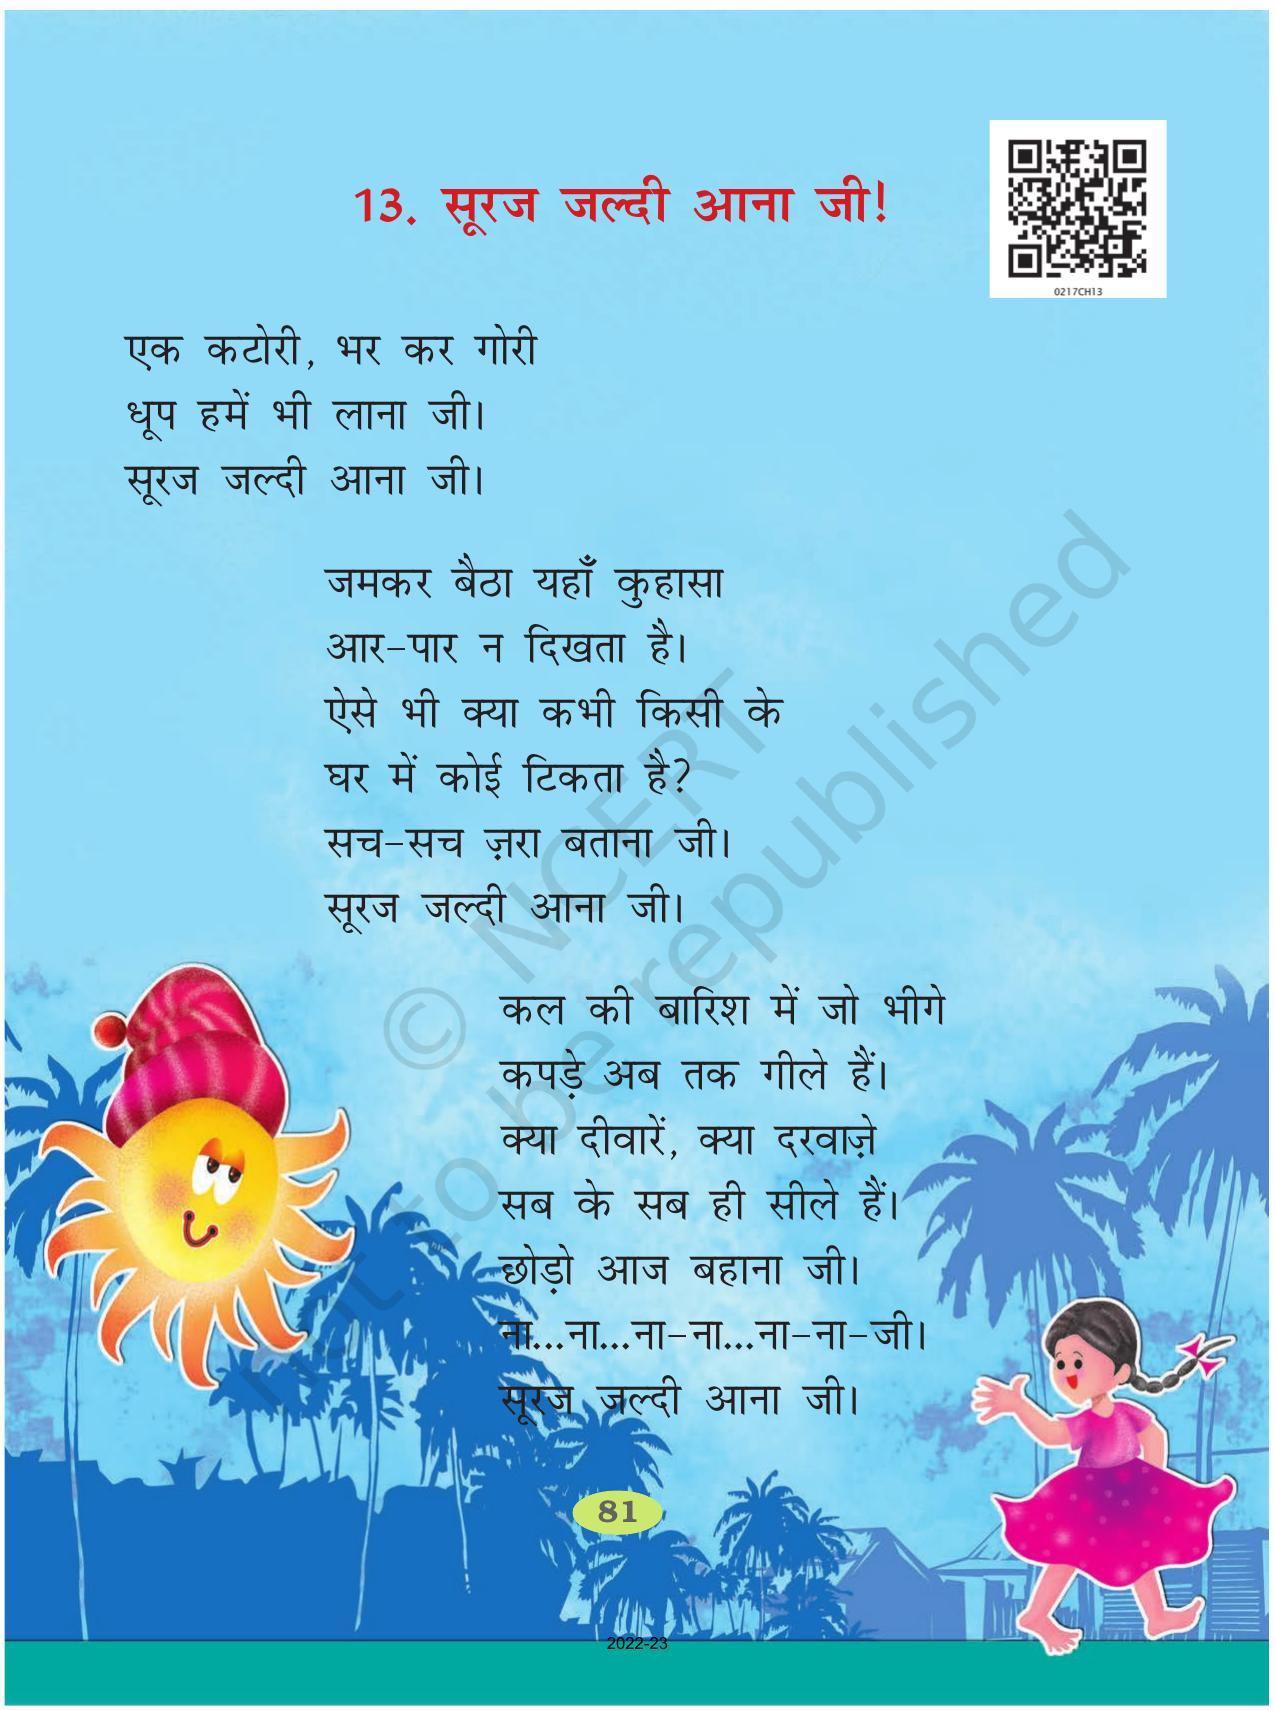 NCERT Book for Class 2 Hindi :Chapter 13-सूरज जल्दी आना जी - Page 1